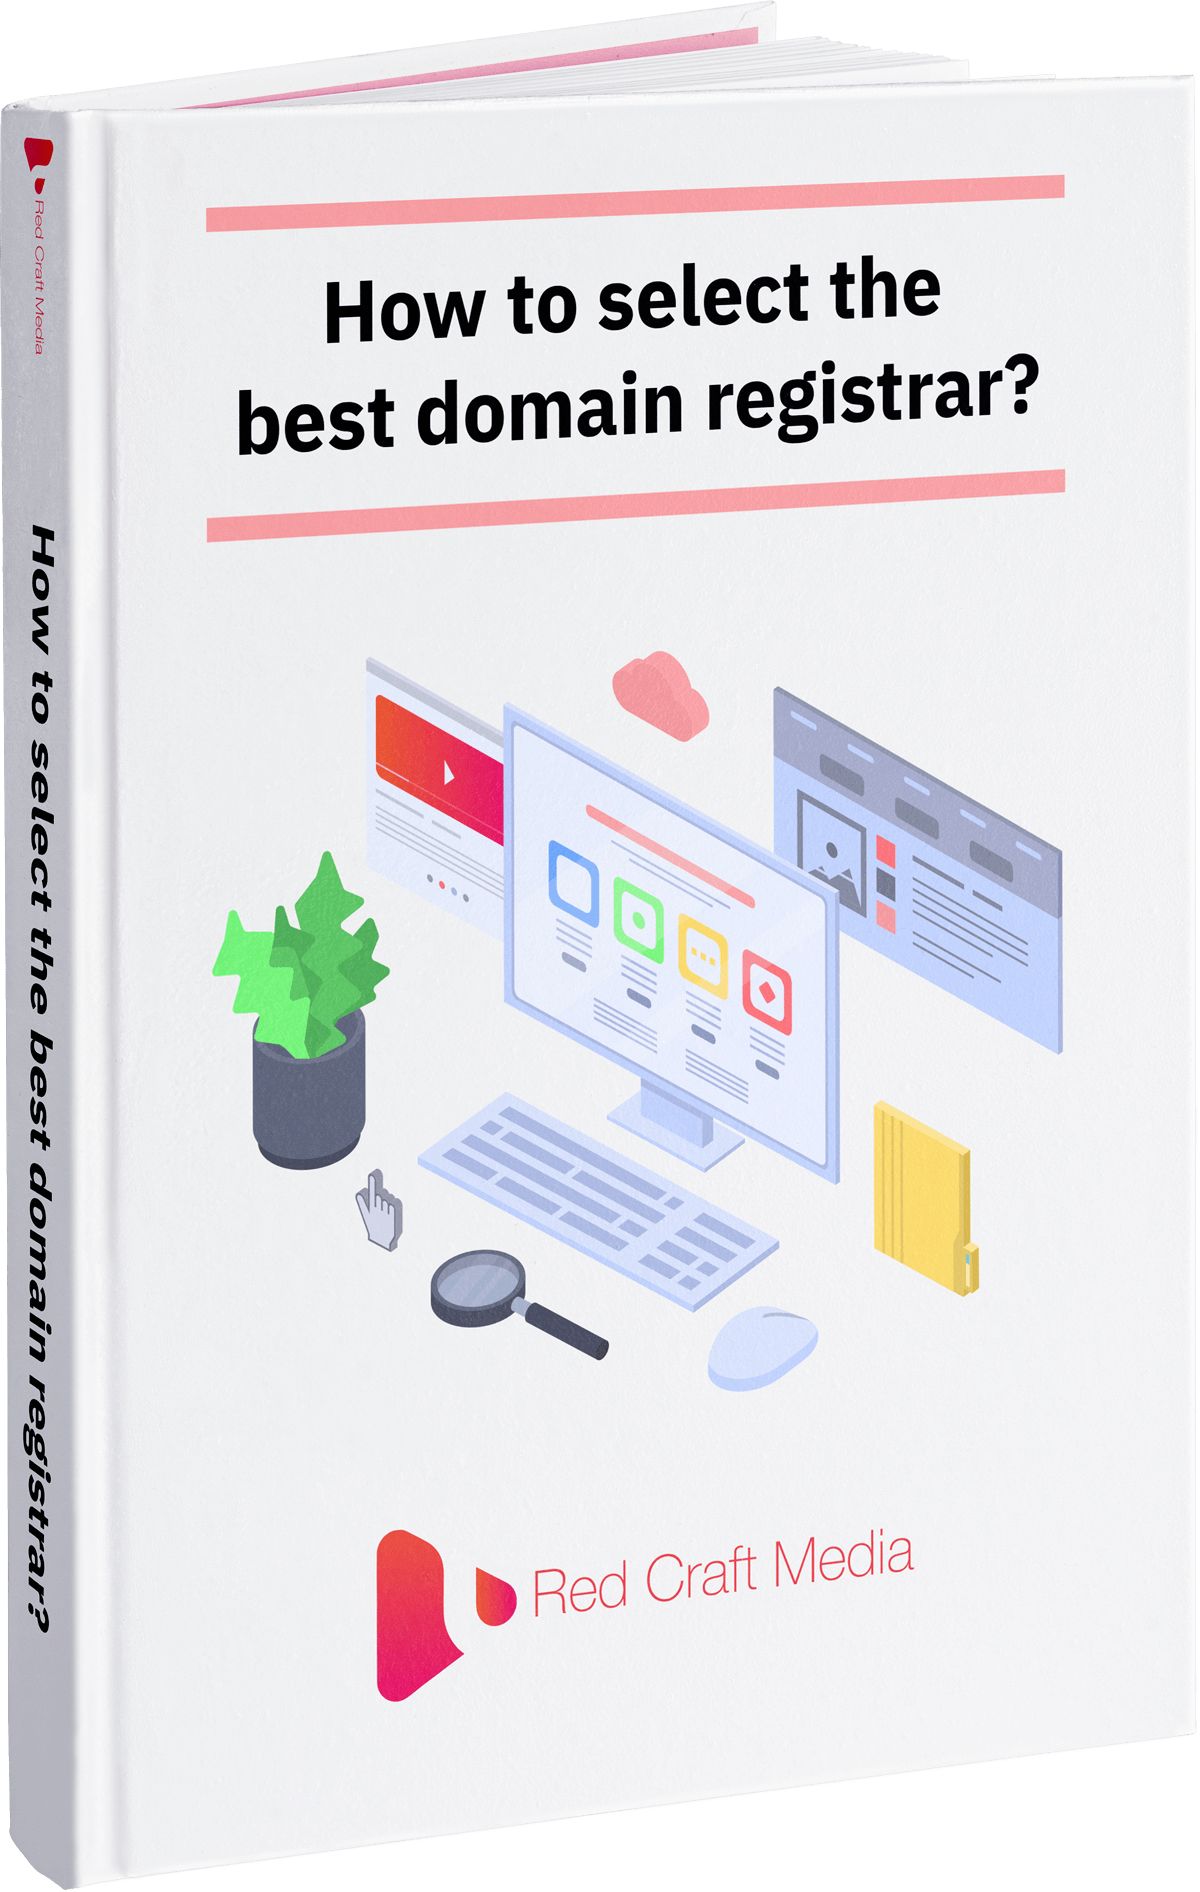 How to Select the Best Domain Registrar